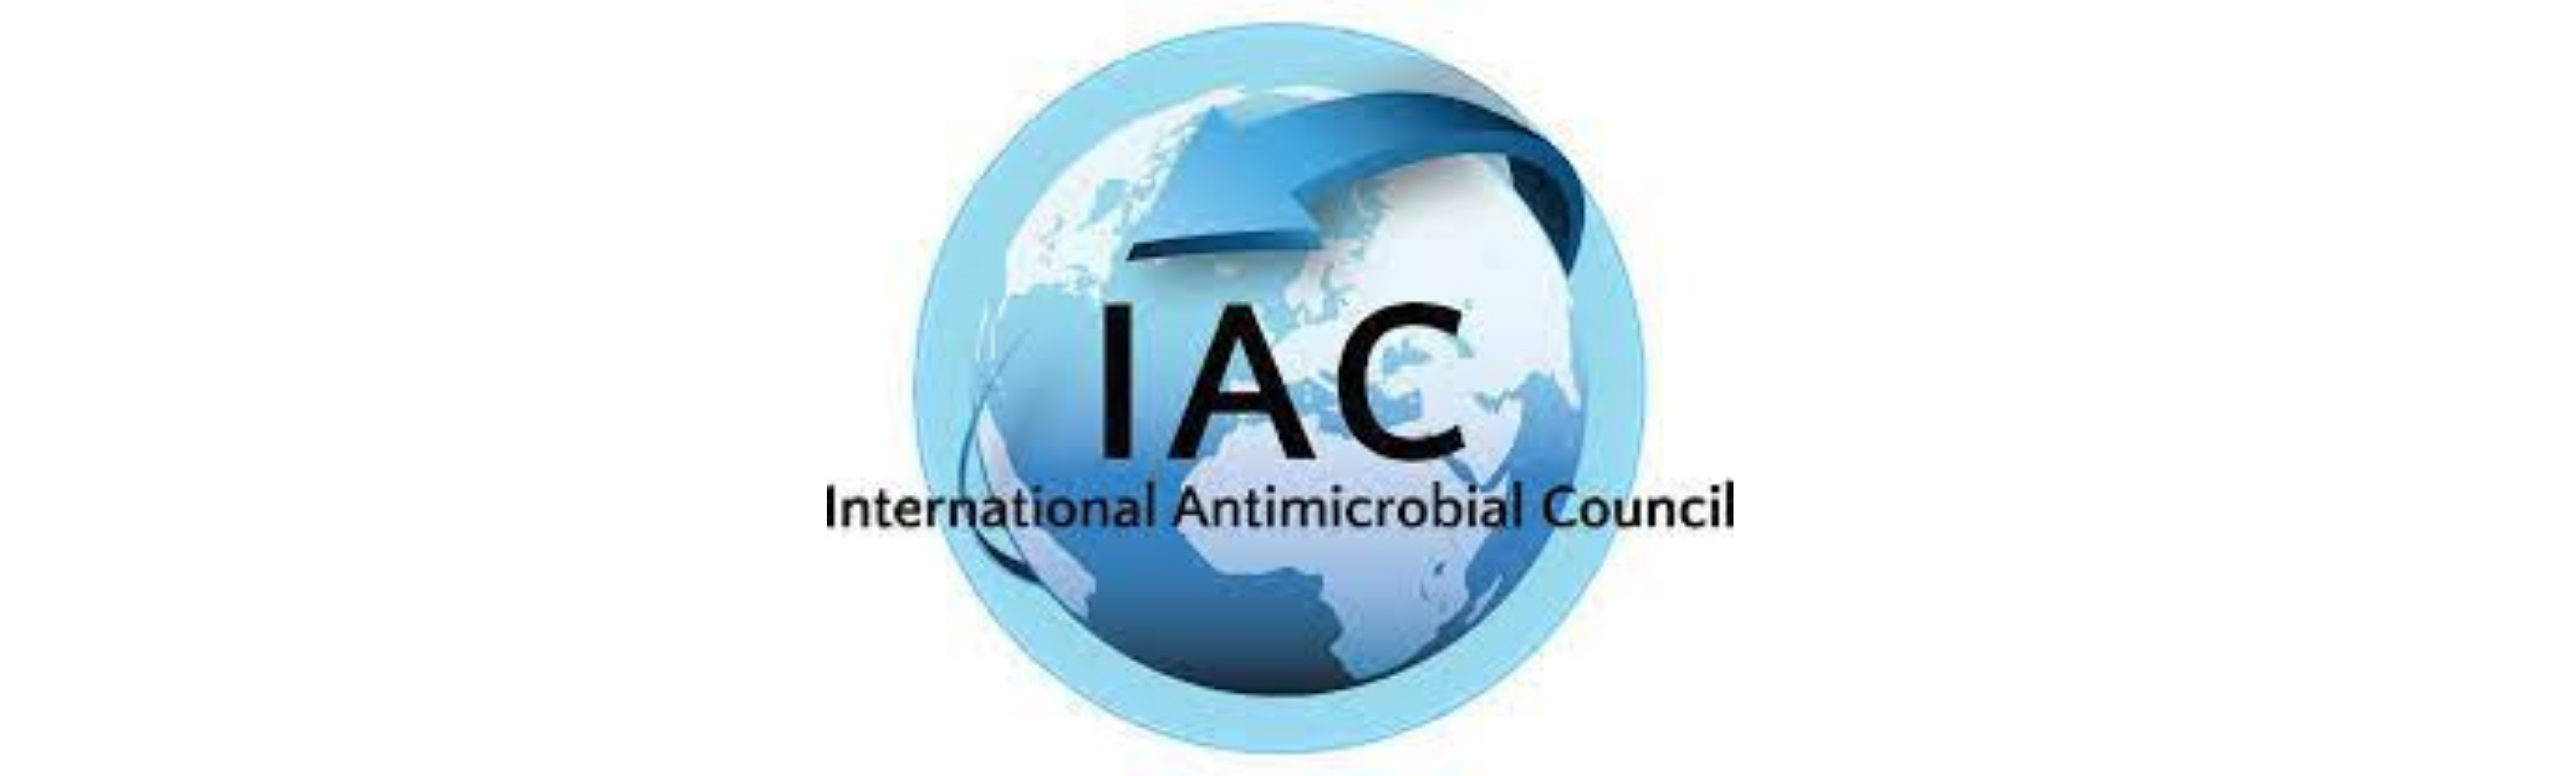  INTERNATIONAL ANTIMICROBIAL COUNCIL ELECTS NEW BOARD OF DIRECTORS